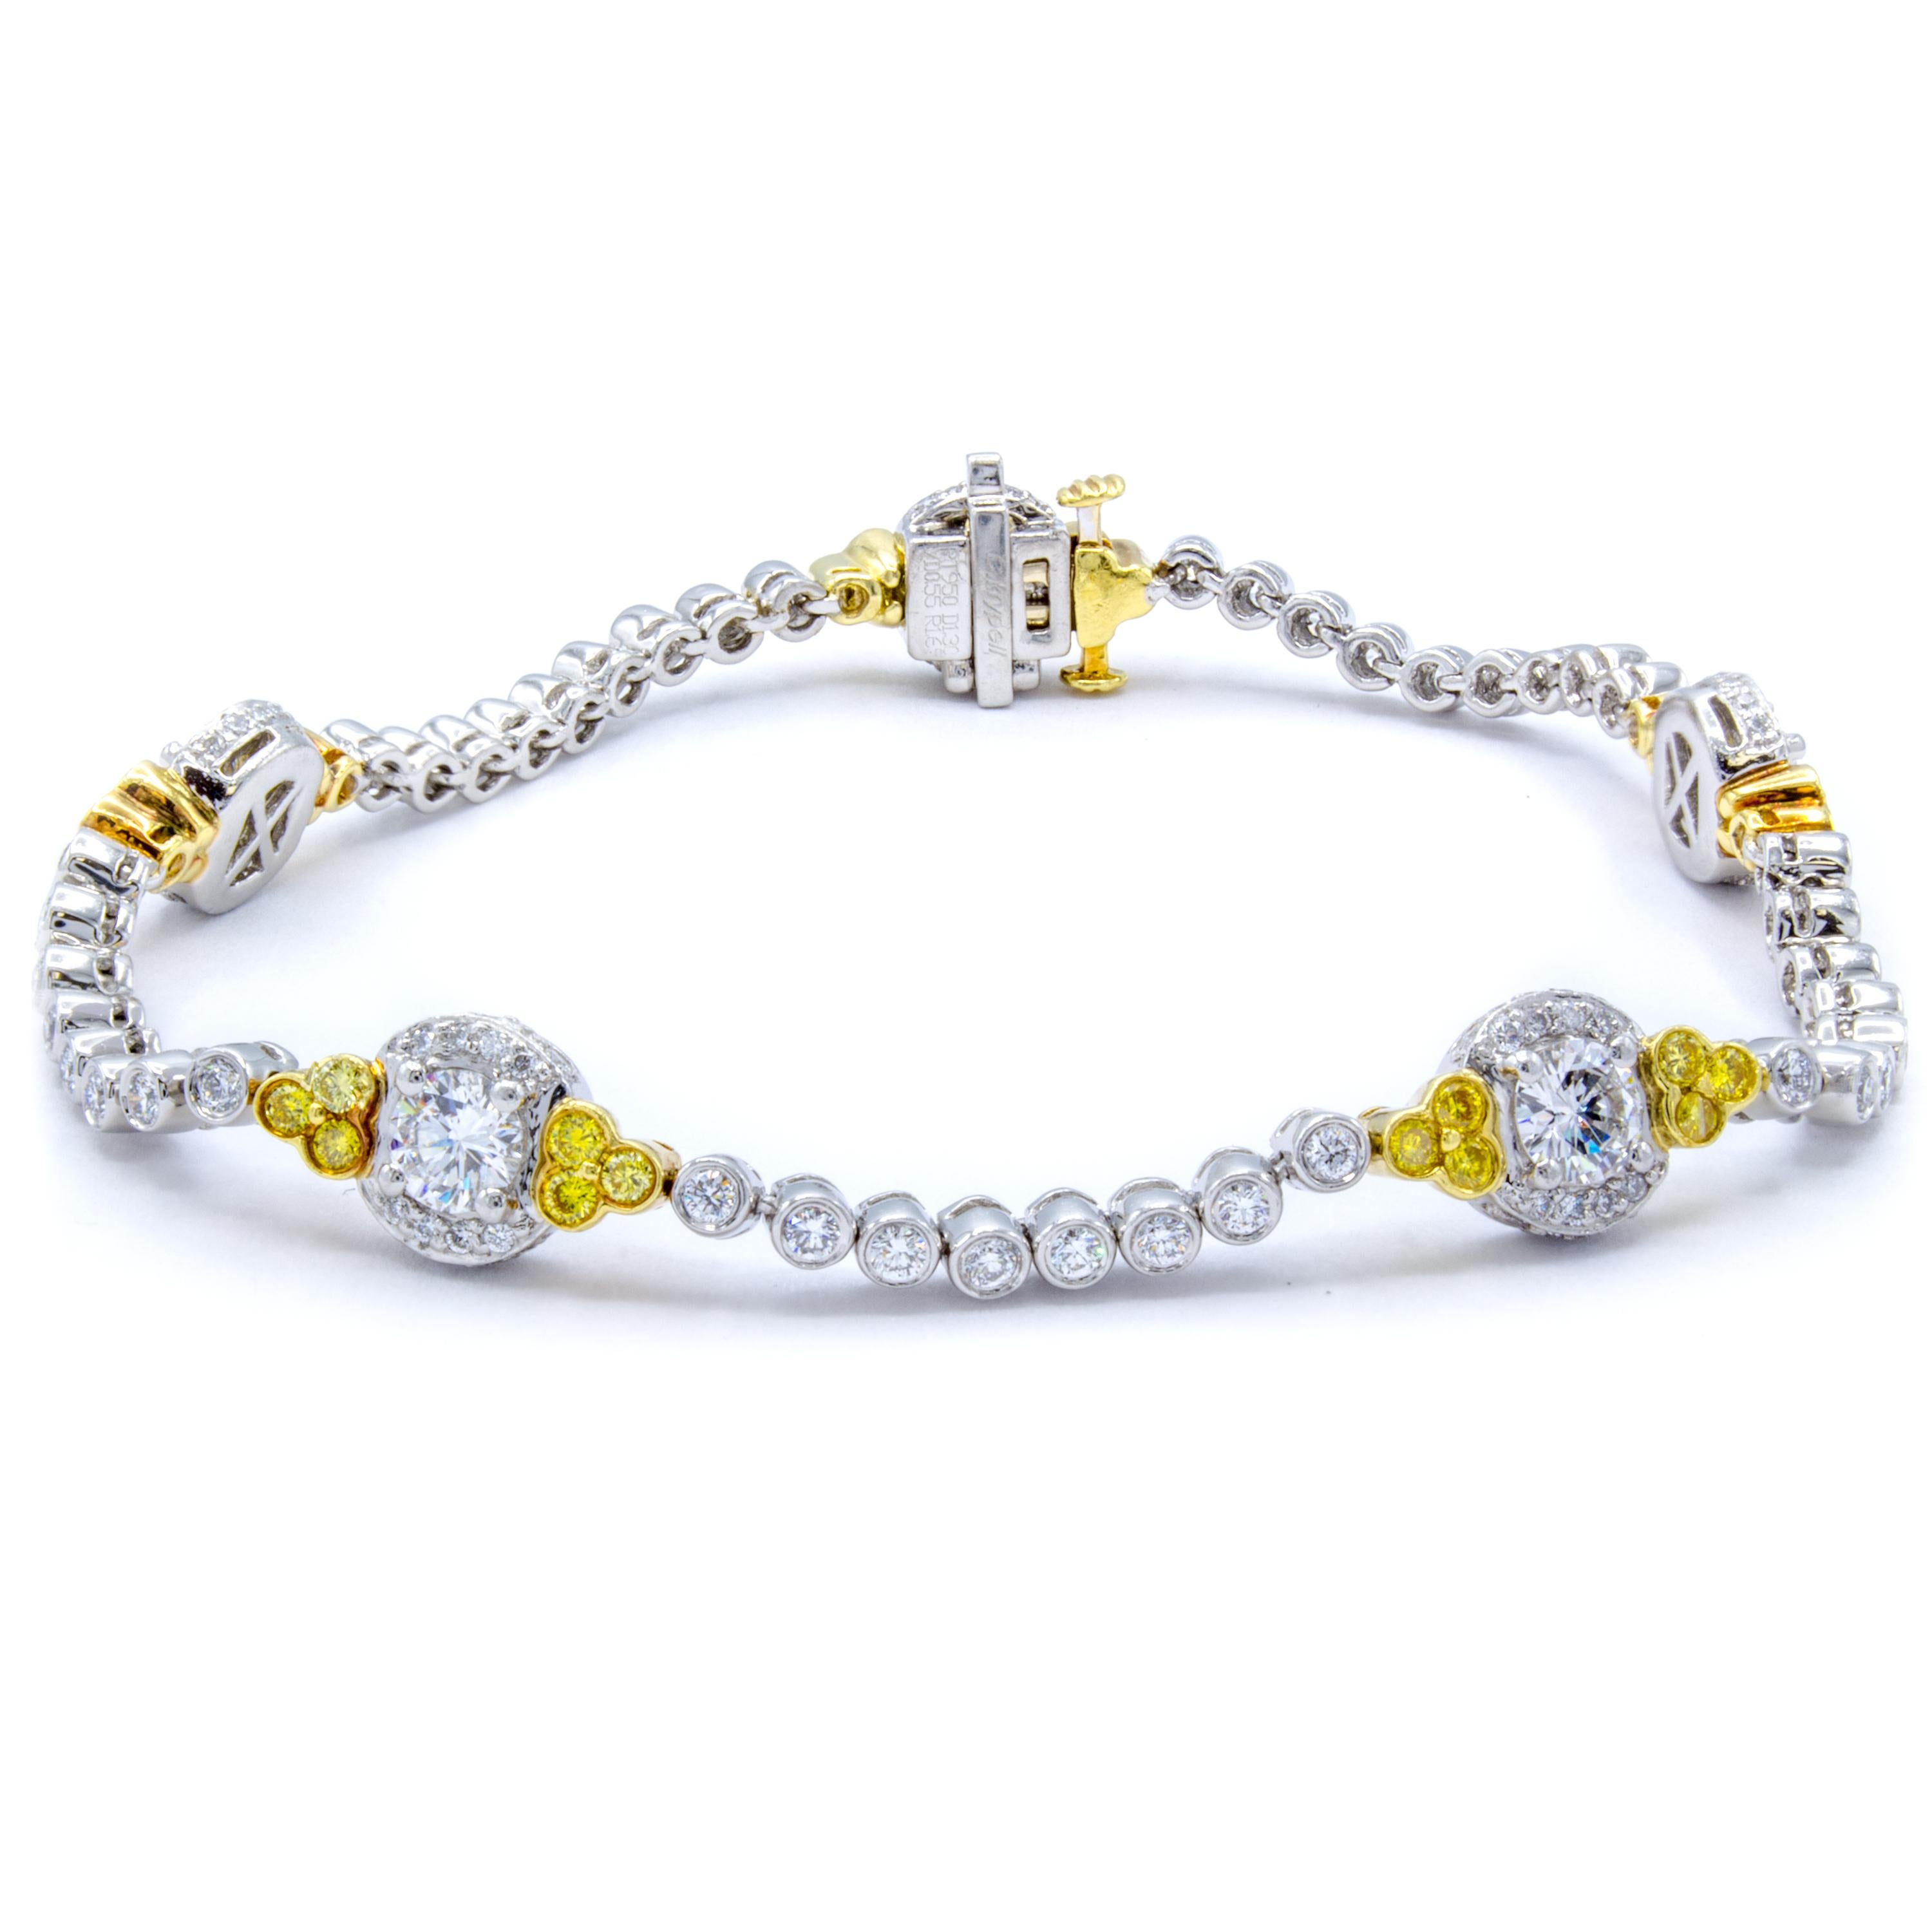 This delightful diamond bracelet features 3.50 carats of both exceptional white round brilliant diamonds and the remarkable color from natural fancy yellow round brilliants. An elegant design in platinum and 18Kt yellow gold wraps gently around the